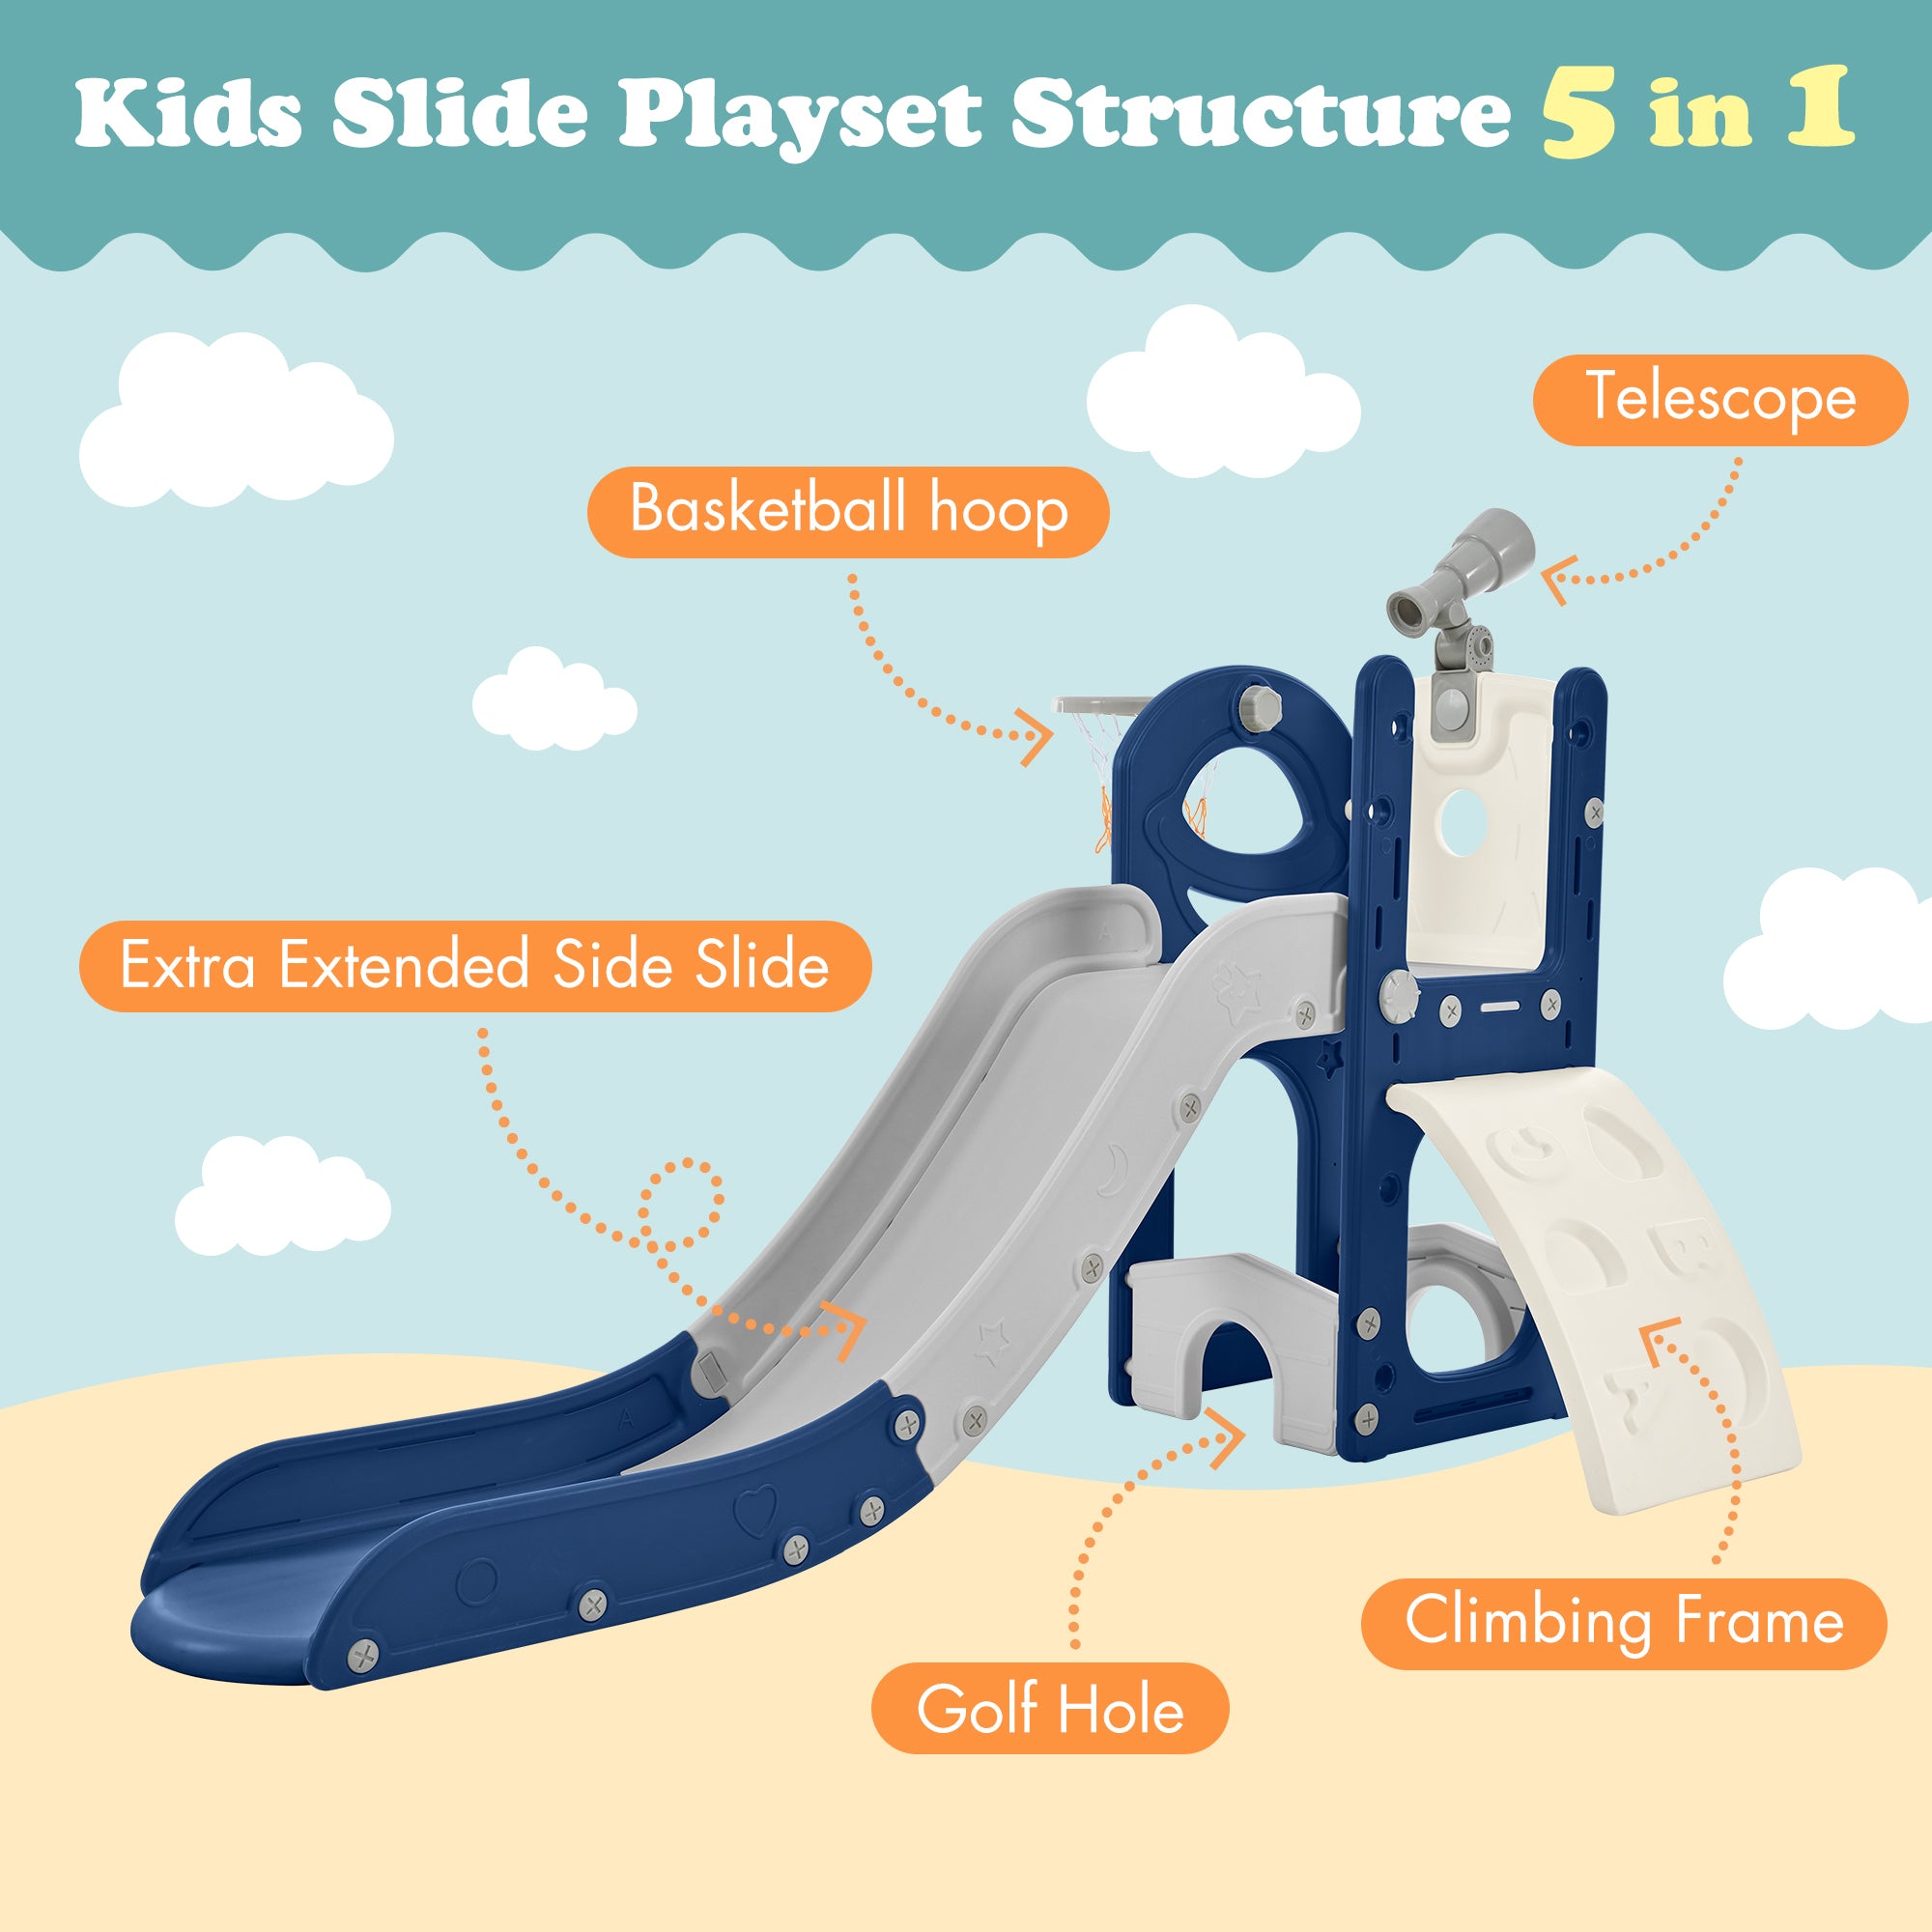 🆓🚛 Kids Slide Playset Structure 5 In 1, Freestanding Spaceship Set With Slide, Telescope & Basketball Hoop, Golf Holes for Toddlers, Kids Climbers Playground Blue & Gray